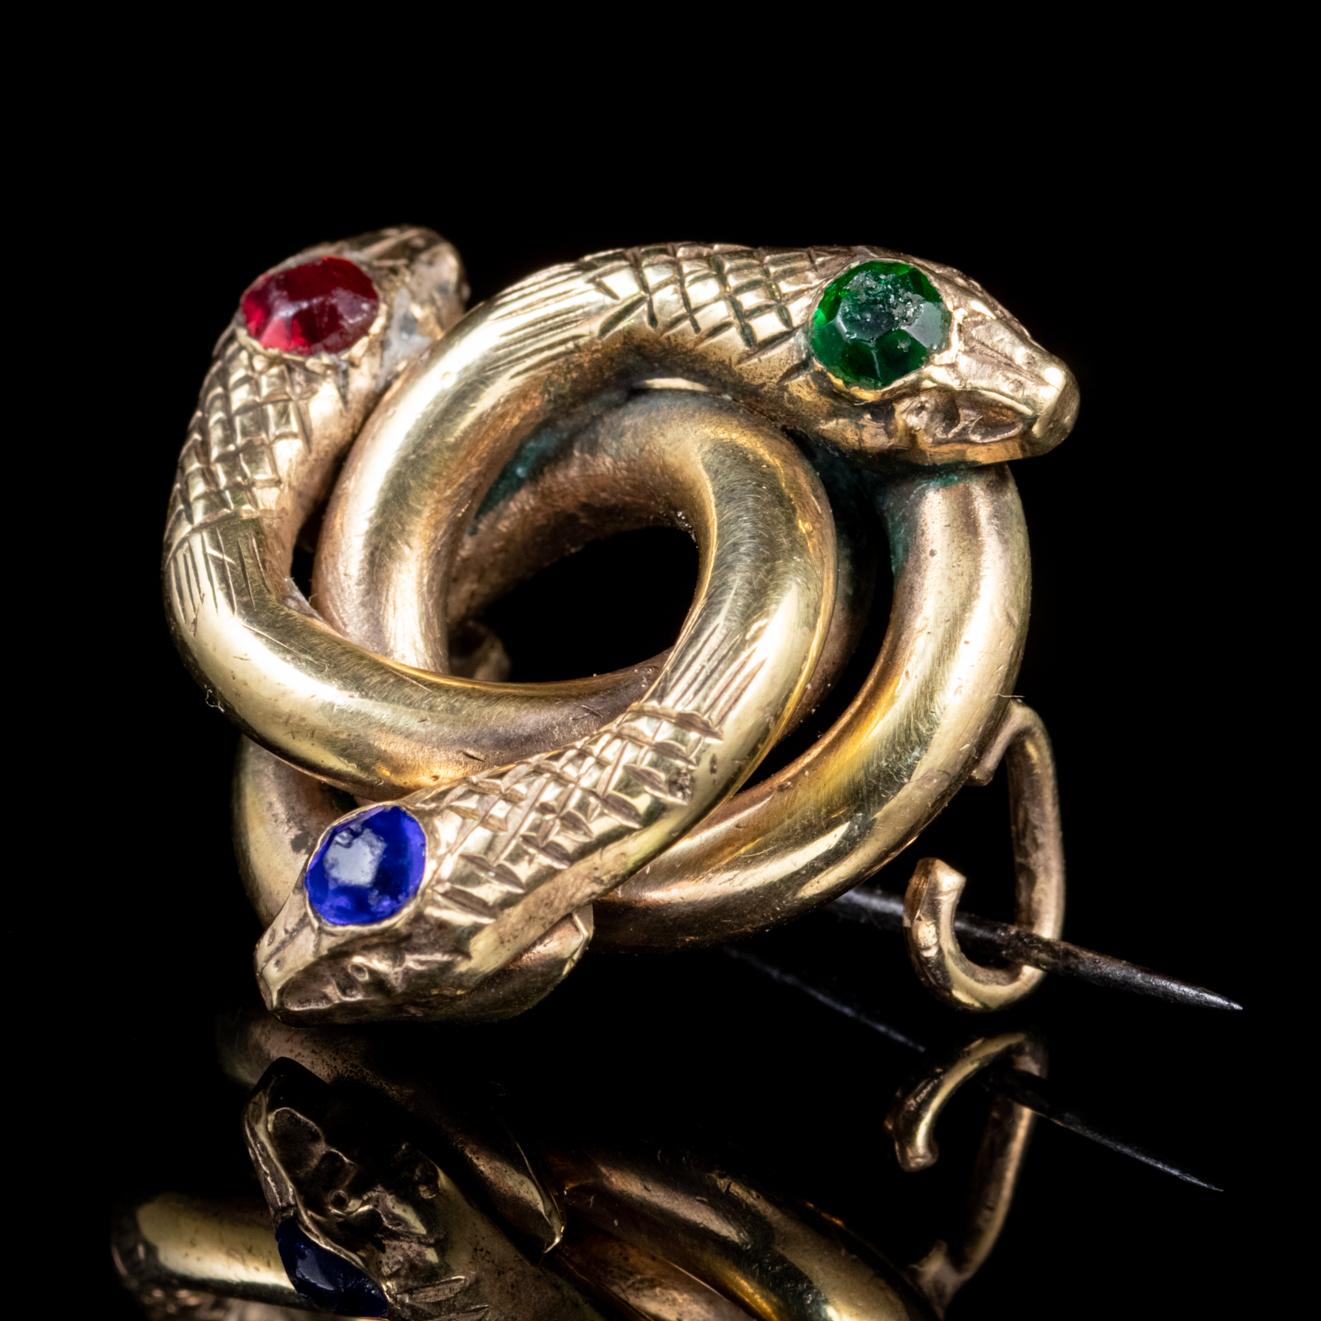 This fabulous Victorian snake brooch is set in Steel, gilded in 18ct Yellow Gold and depicts three coiled serpents, each crowned with a Paste stone in blue, red and green.

Serpent jewellery became popular in the Victorian era and symbolized a